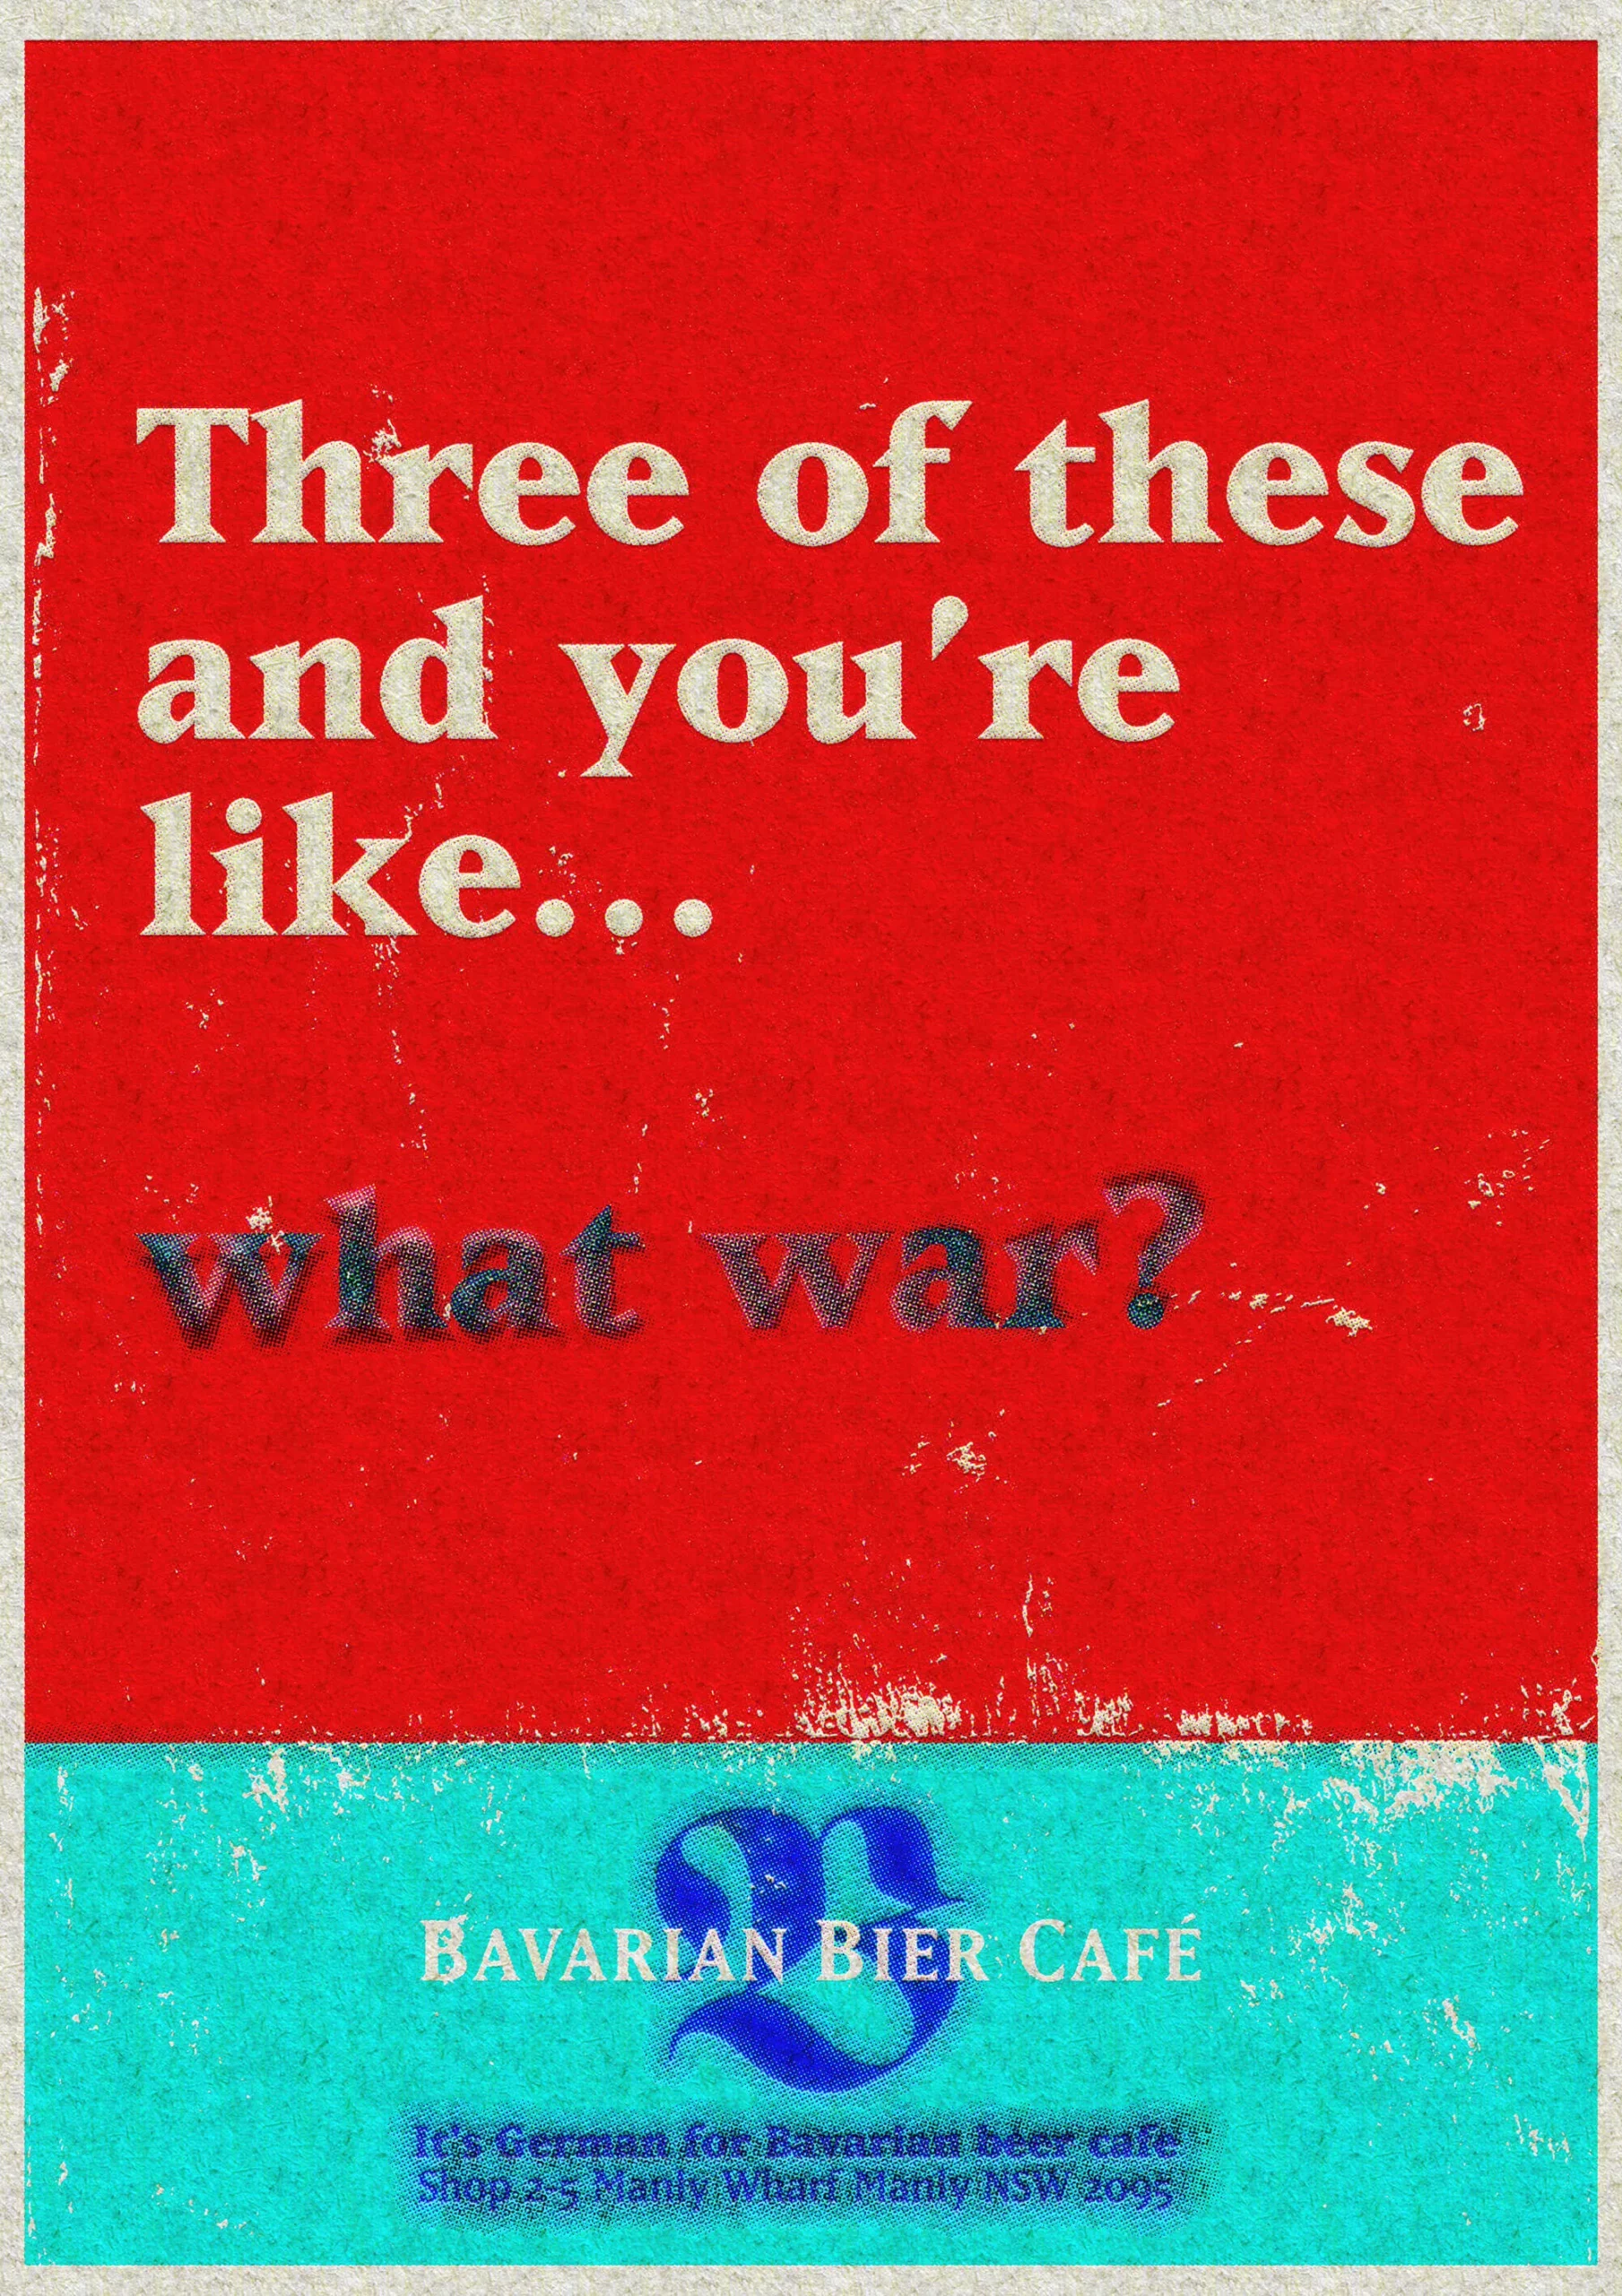 An advert for a Bavarian Bier Café that says "Three of these and you're like... what war?